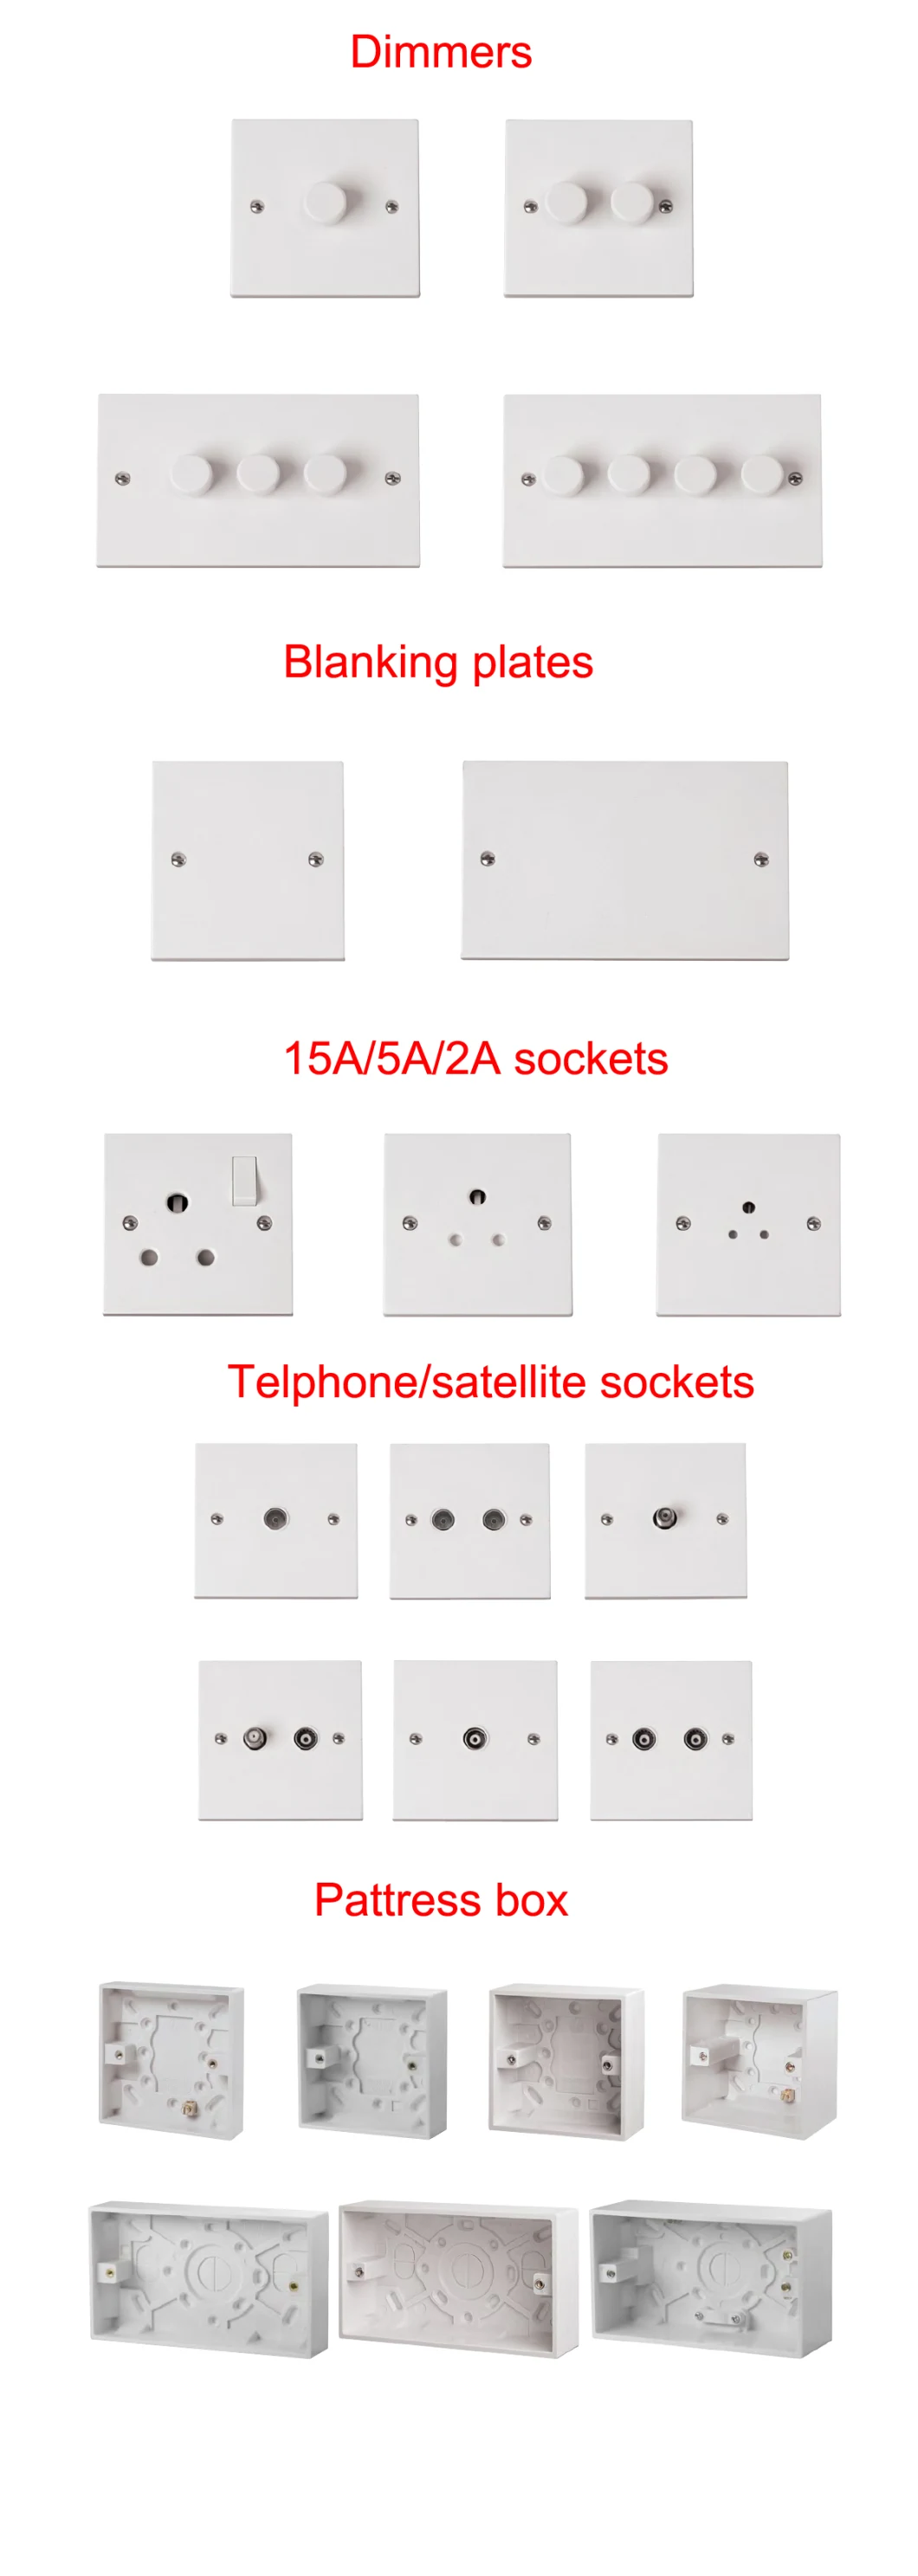 UK 6 Gang 2 Way 10A Electrical Light Wall Switches